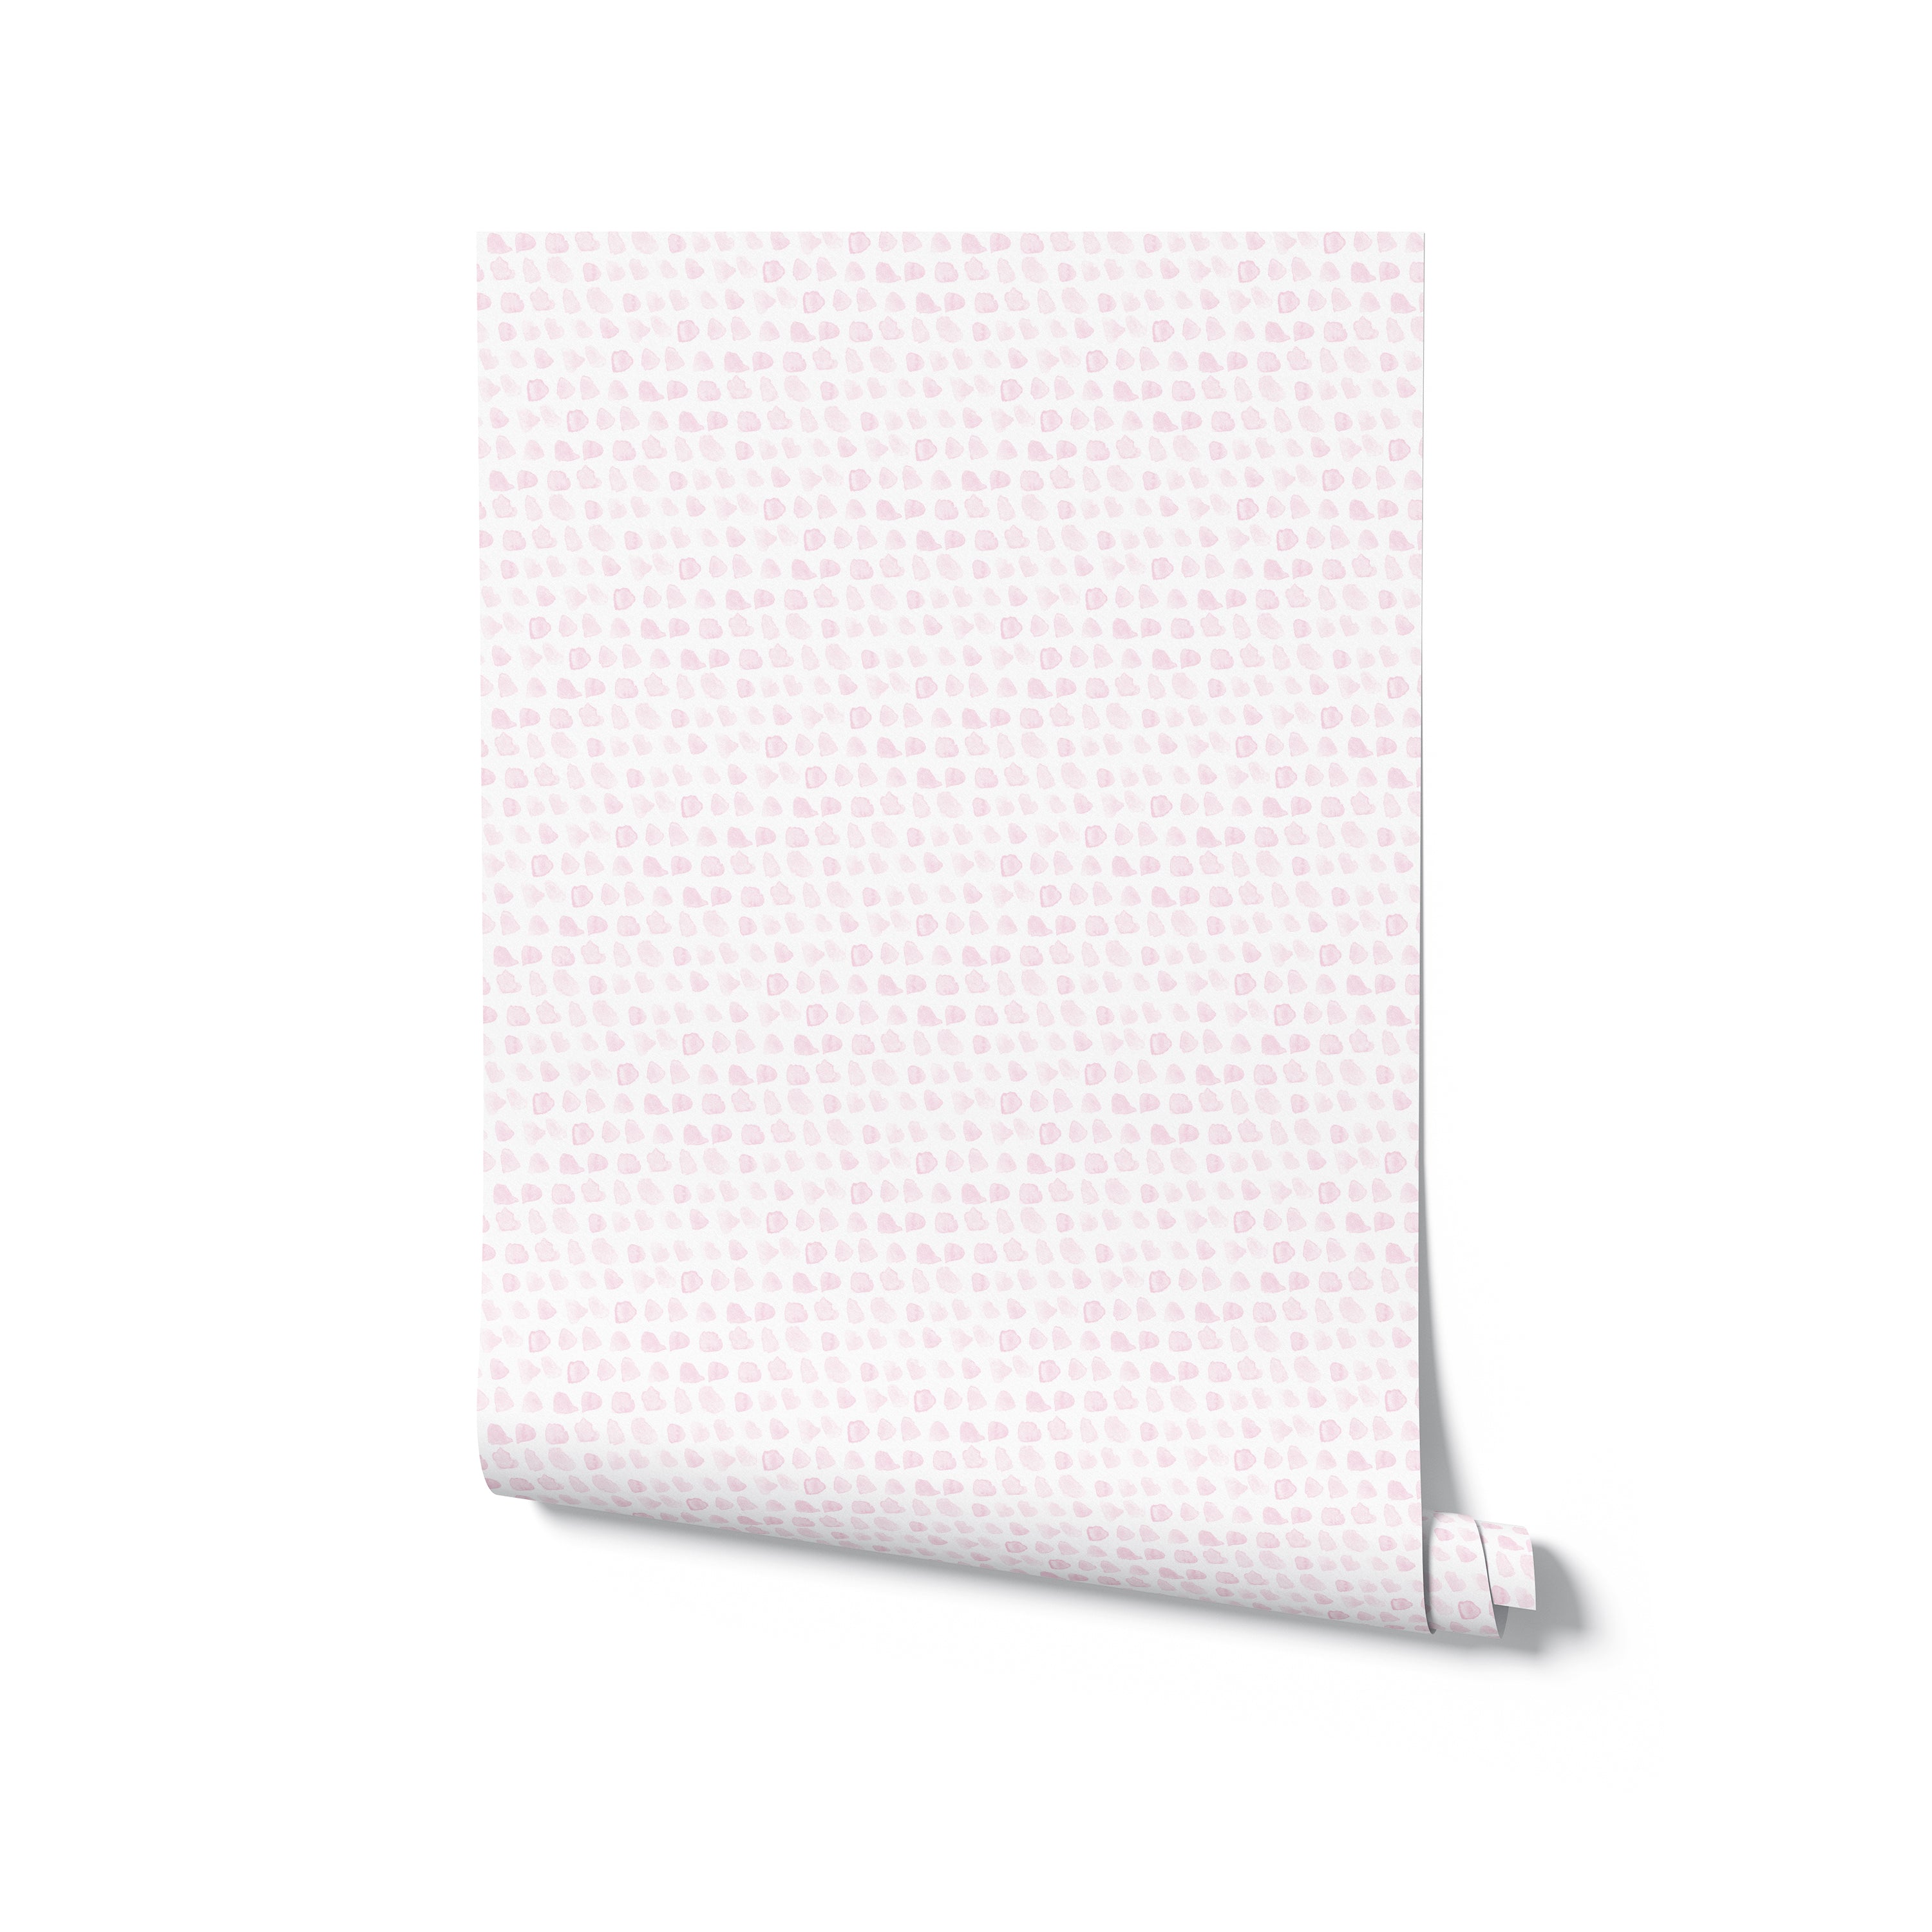 A realistic mockup of the Handpainted Dots Wallpaper rolled up and standing against a white background. The wallpaper features a delicate pattern of painted dots on a peony surface, illustrating the wallpaper's texture and color as it would appear when applied to a wall.